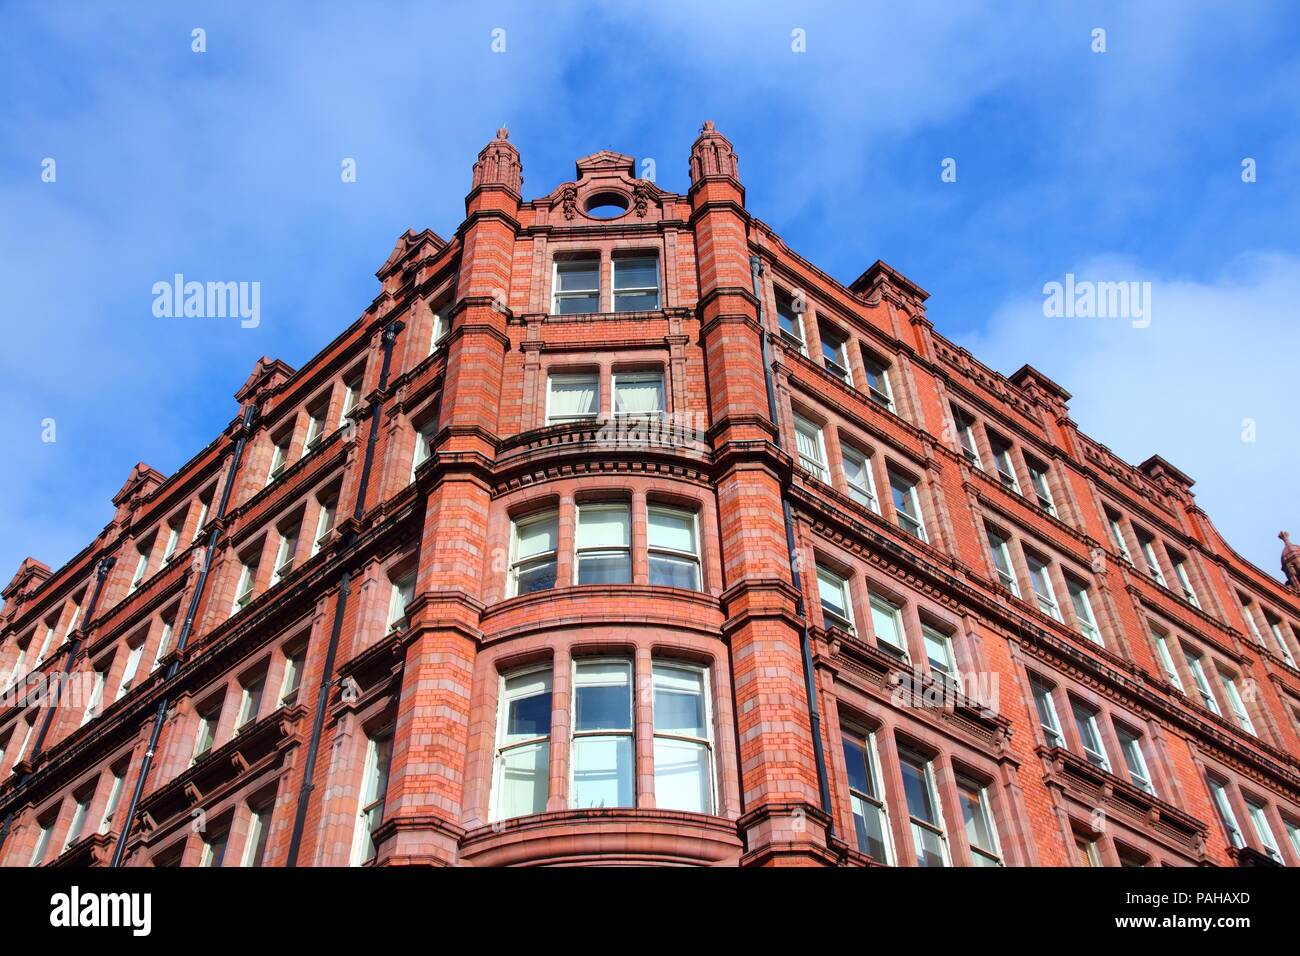 Manchester - Stadt in North West England (UK). Altes Stadthaus. Stockfoto